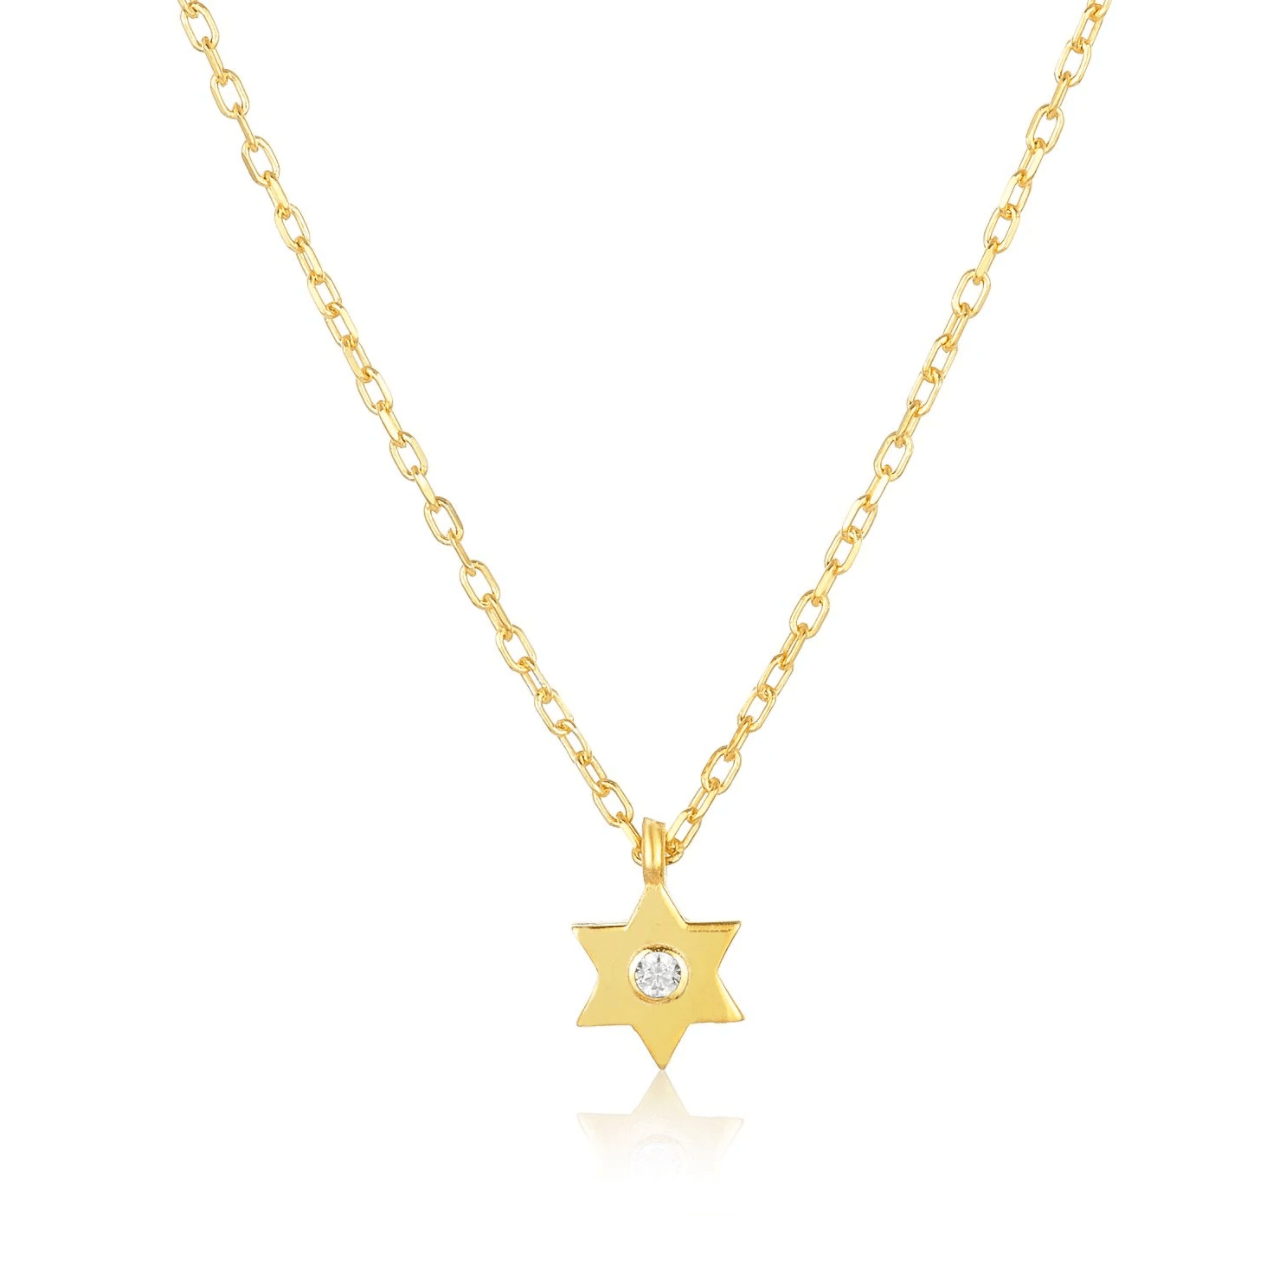 Alef Bet Necklaces Gold Dainty Star of David Necklace with Sparkling Stone - Silver or Gold